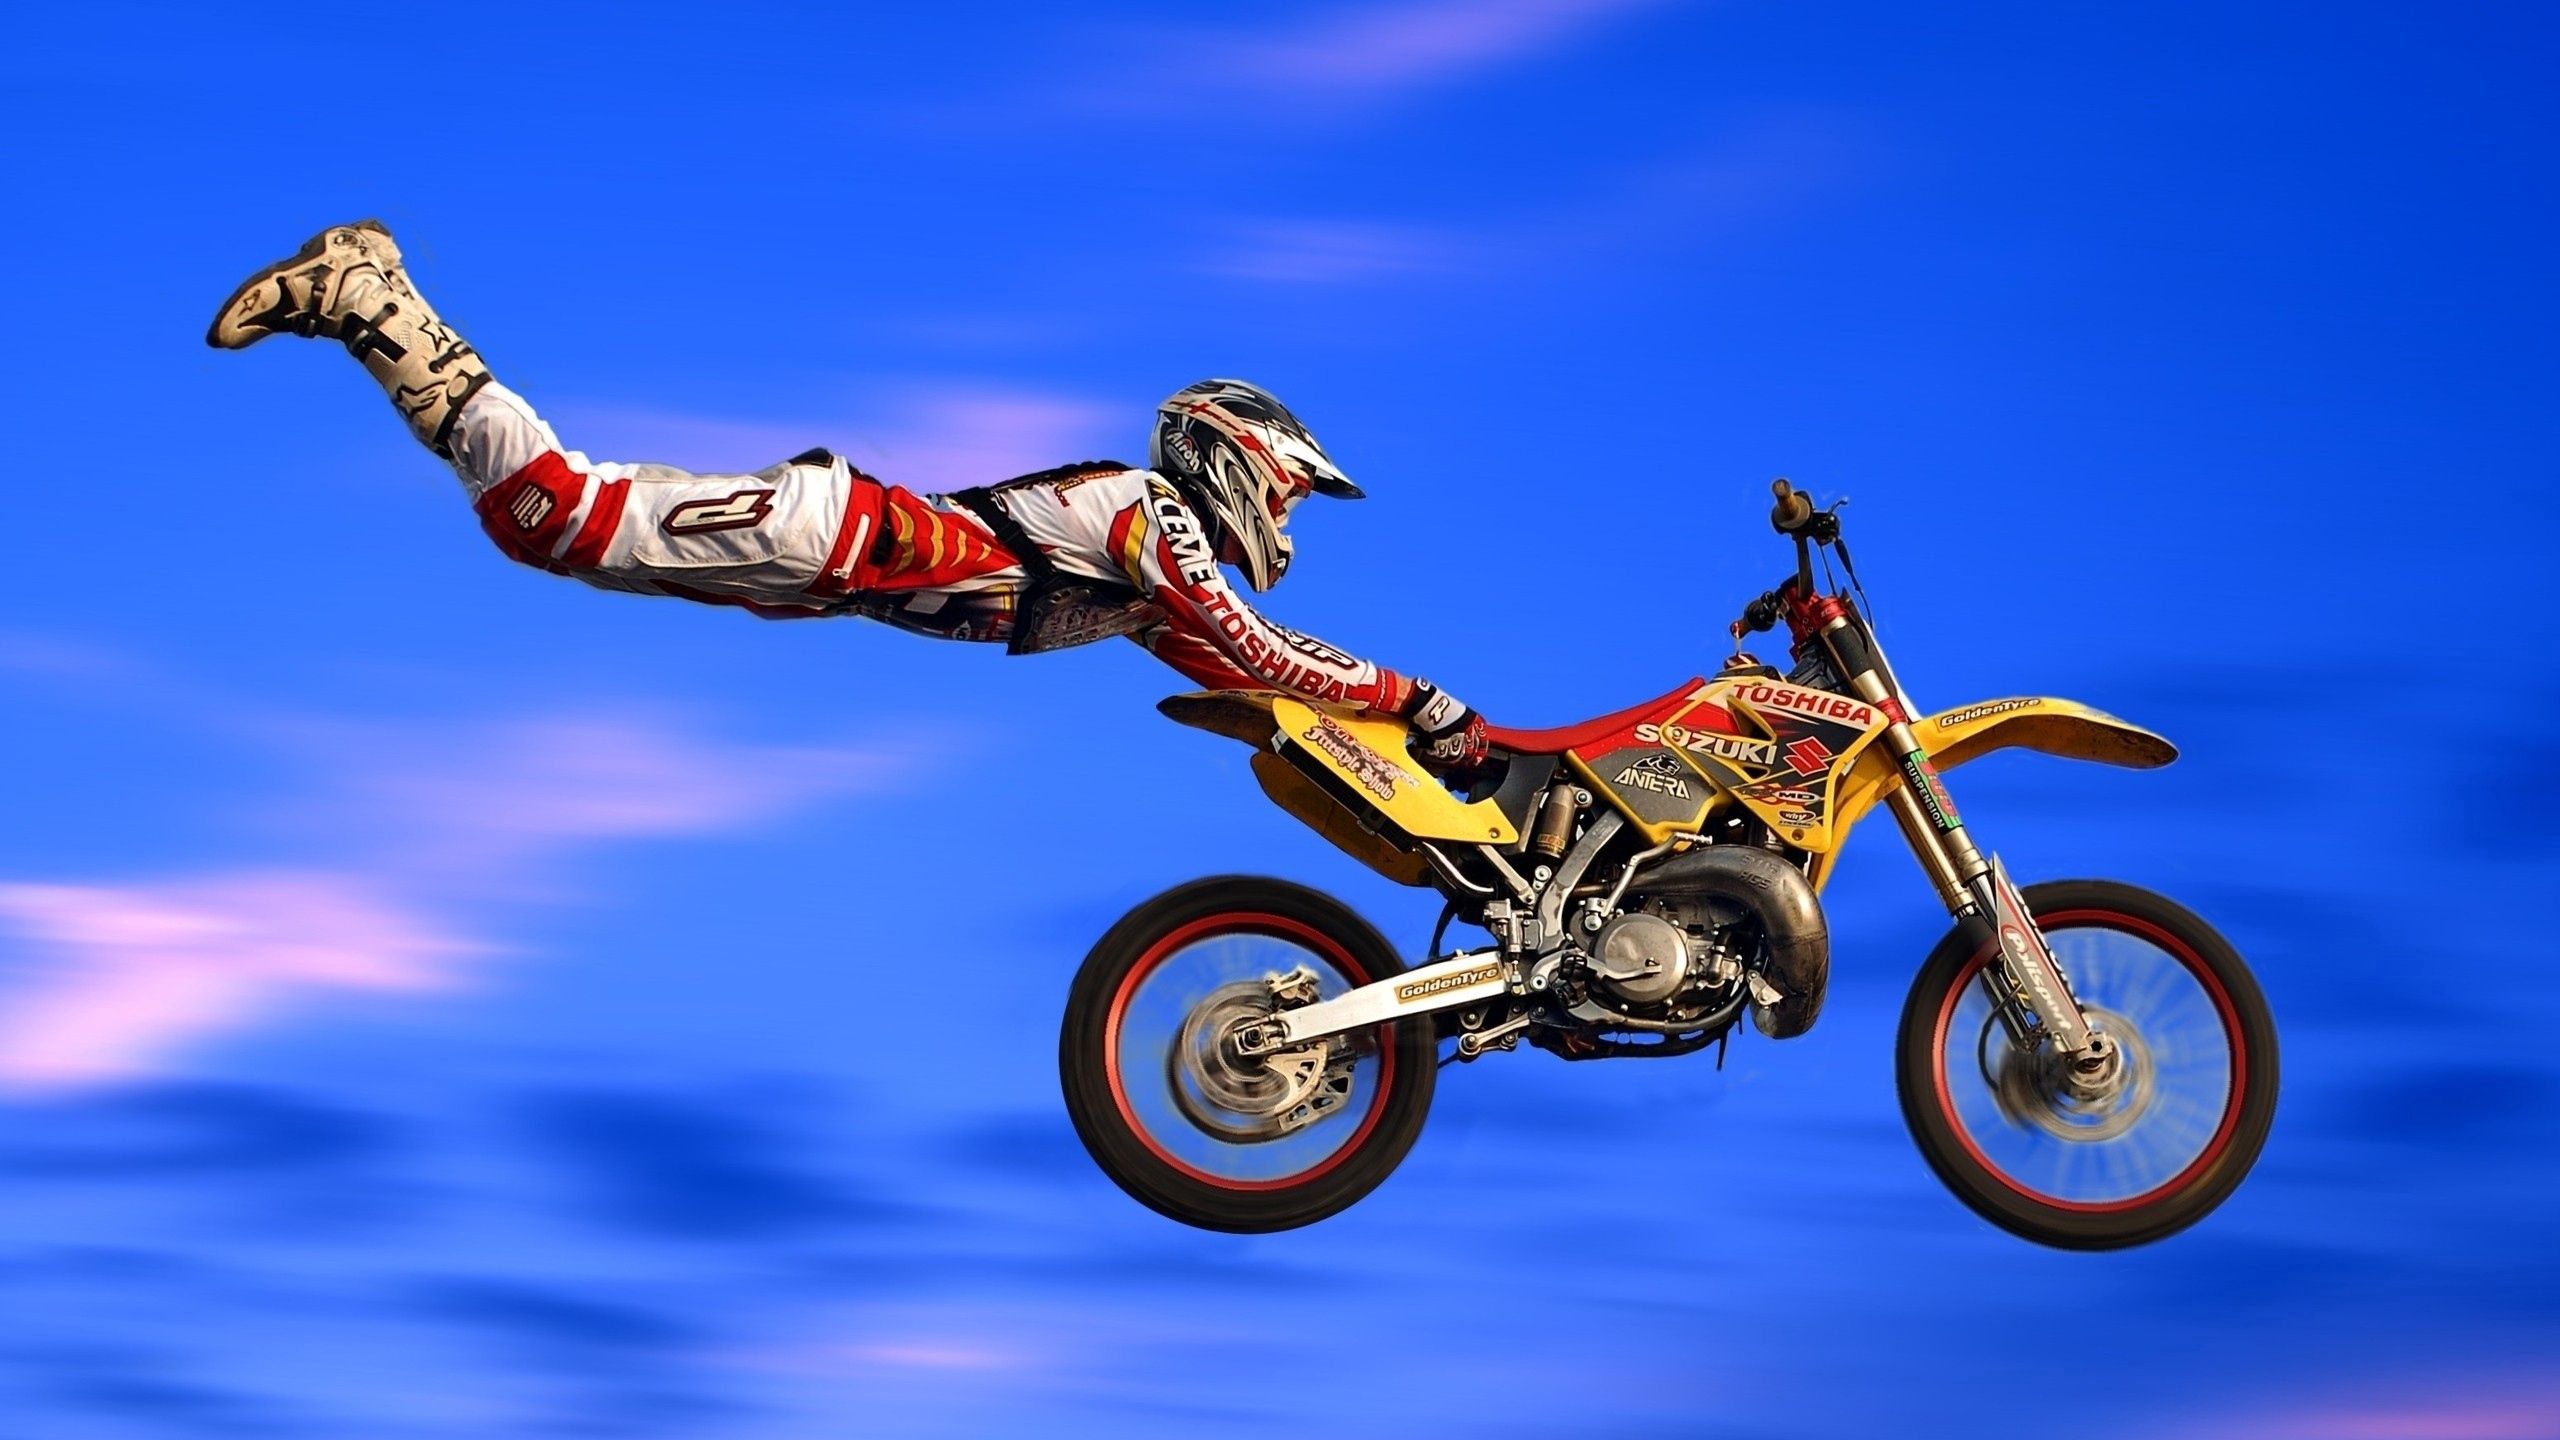 motorcycles, flight, motorcycle, bounce, jump, extreme, trick, costume, danger